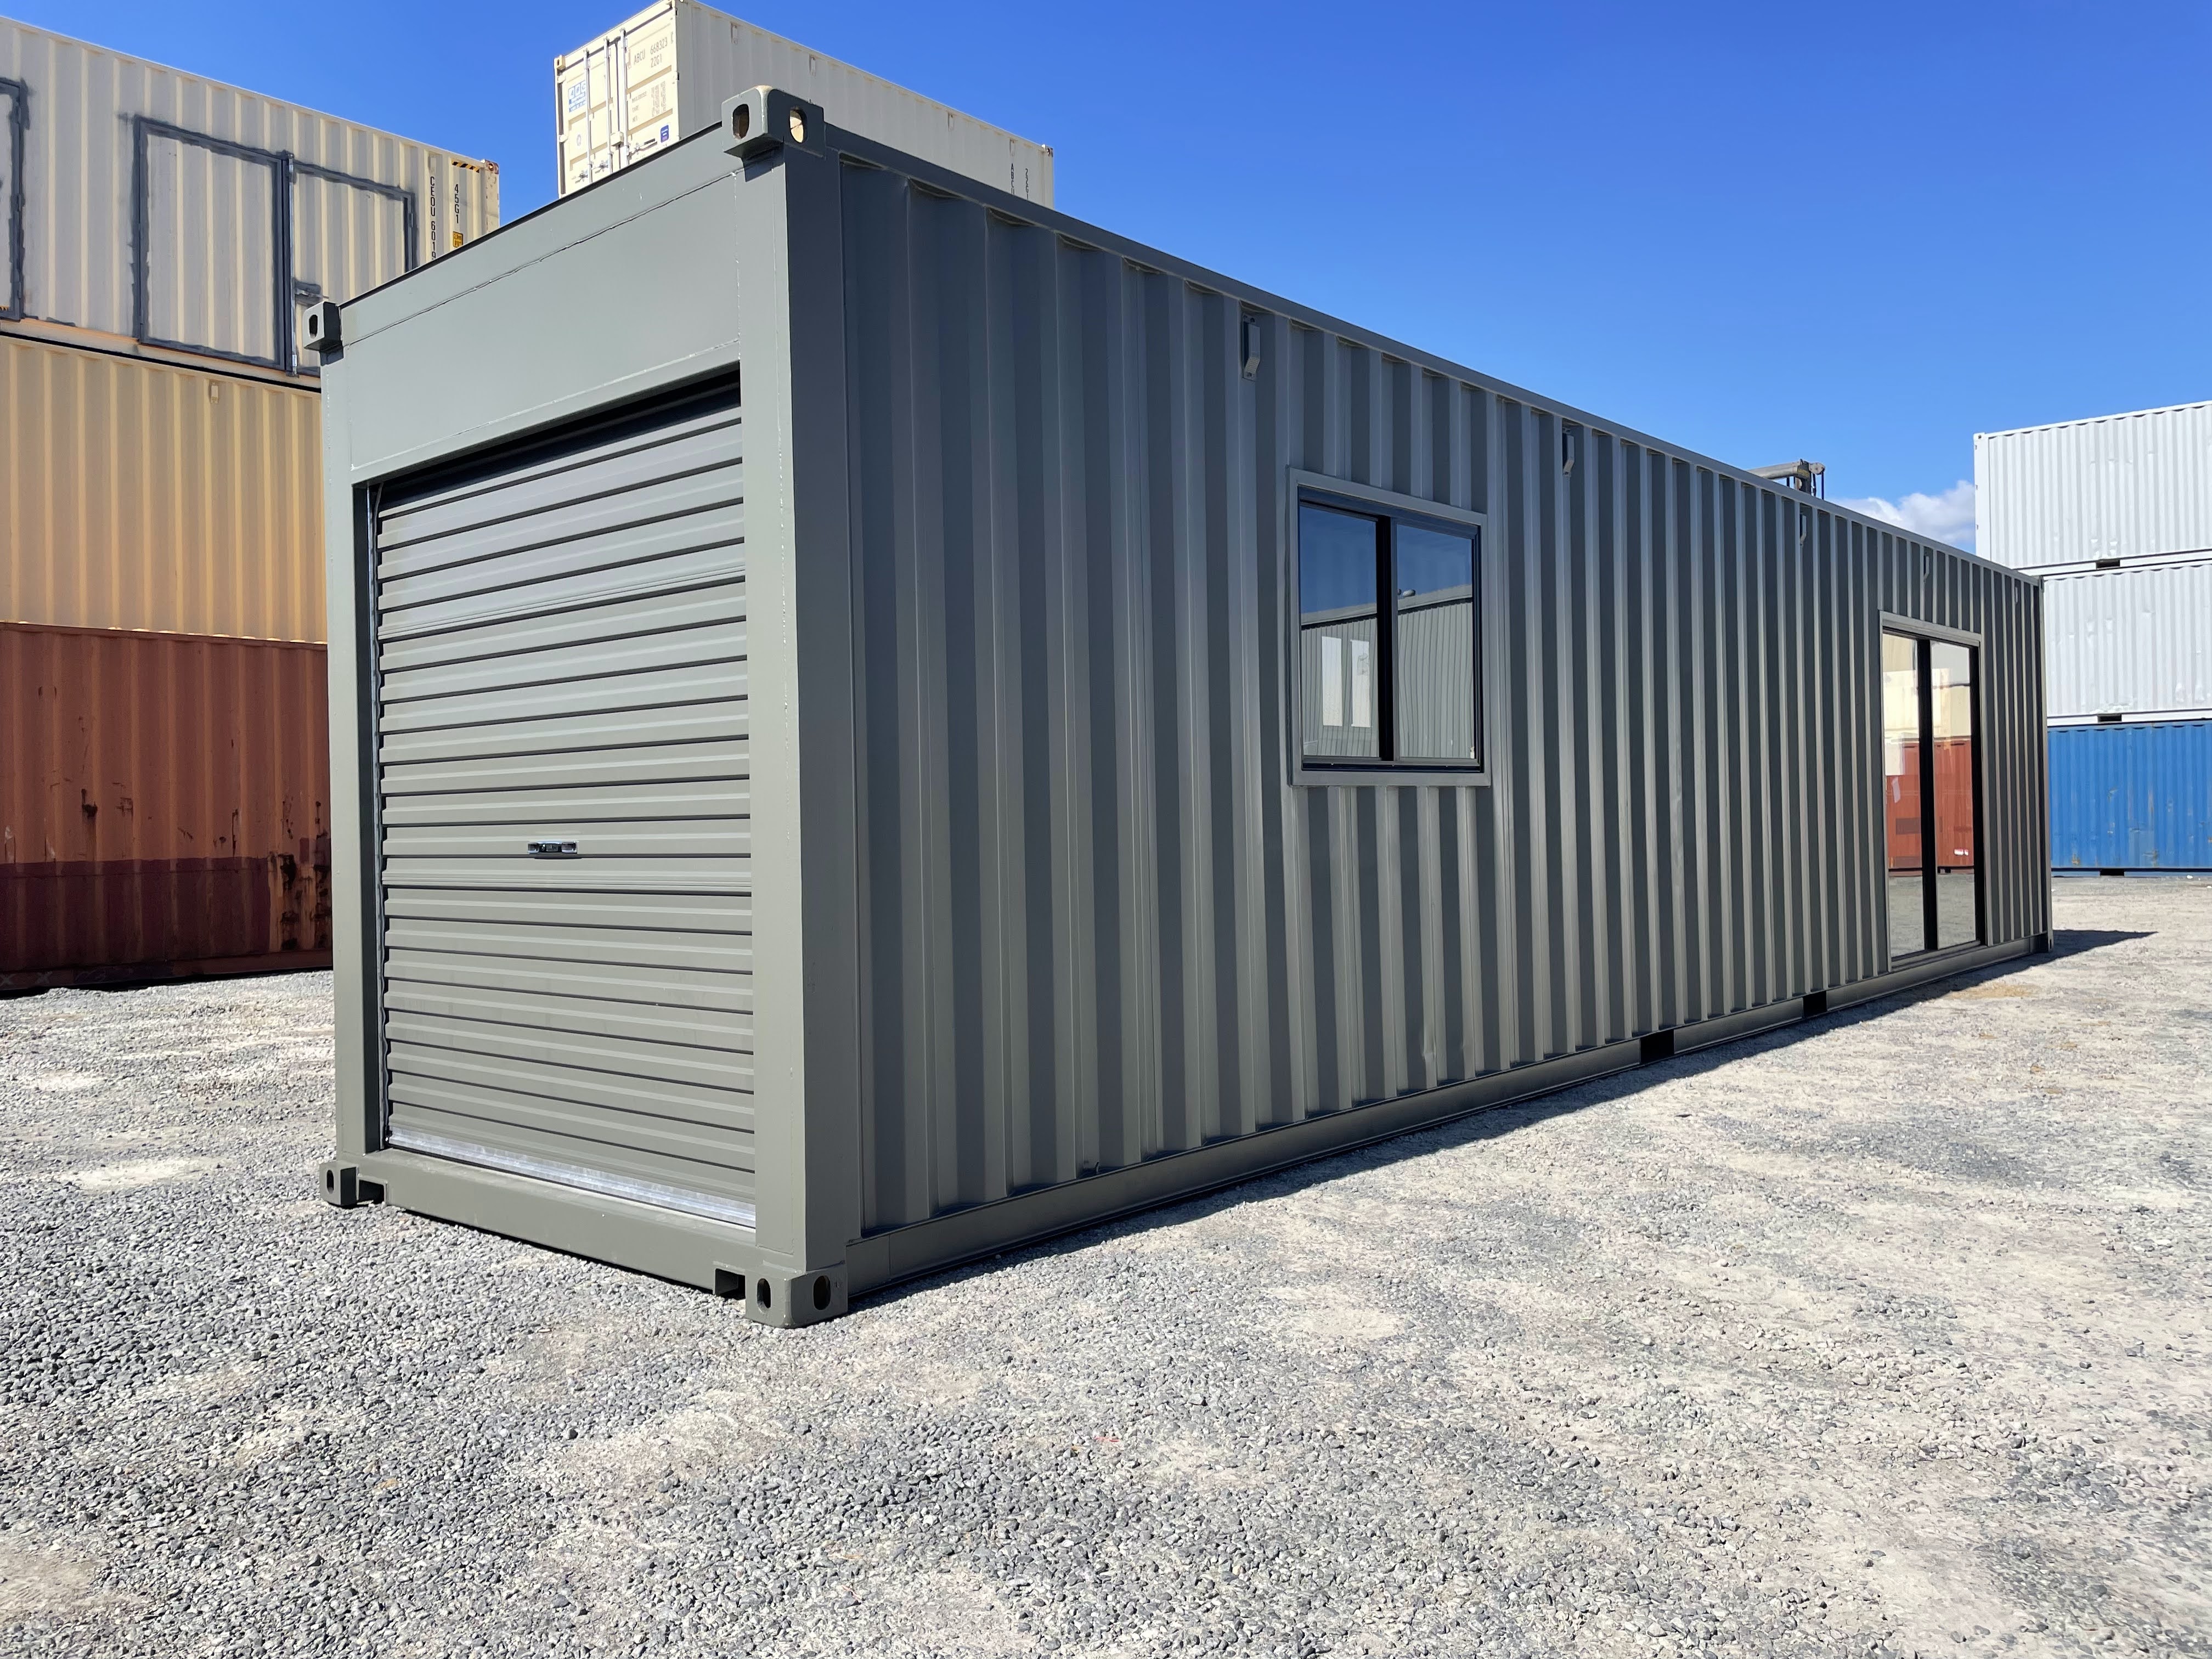 Modified 40ft shipping container with glass sliding door, garage door and a window